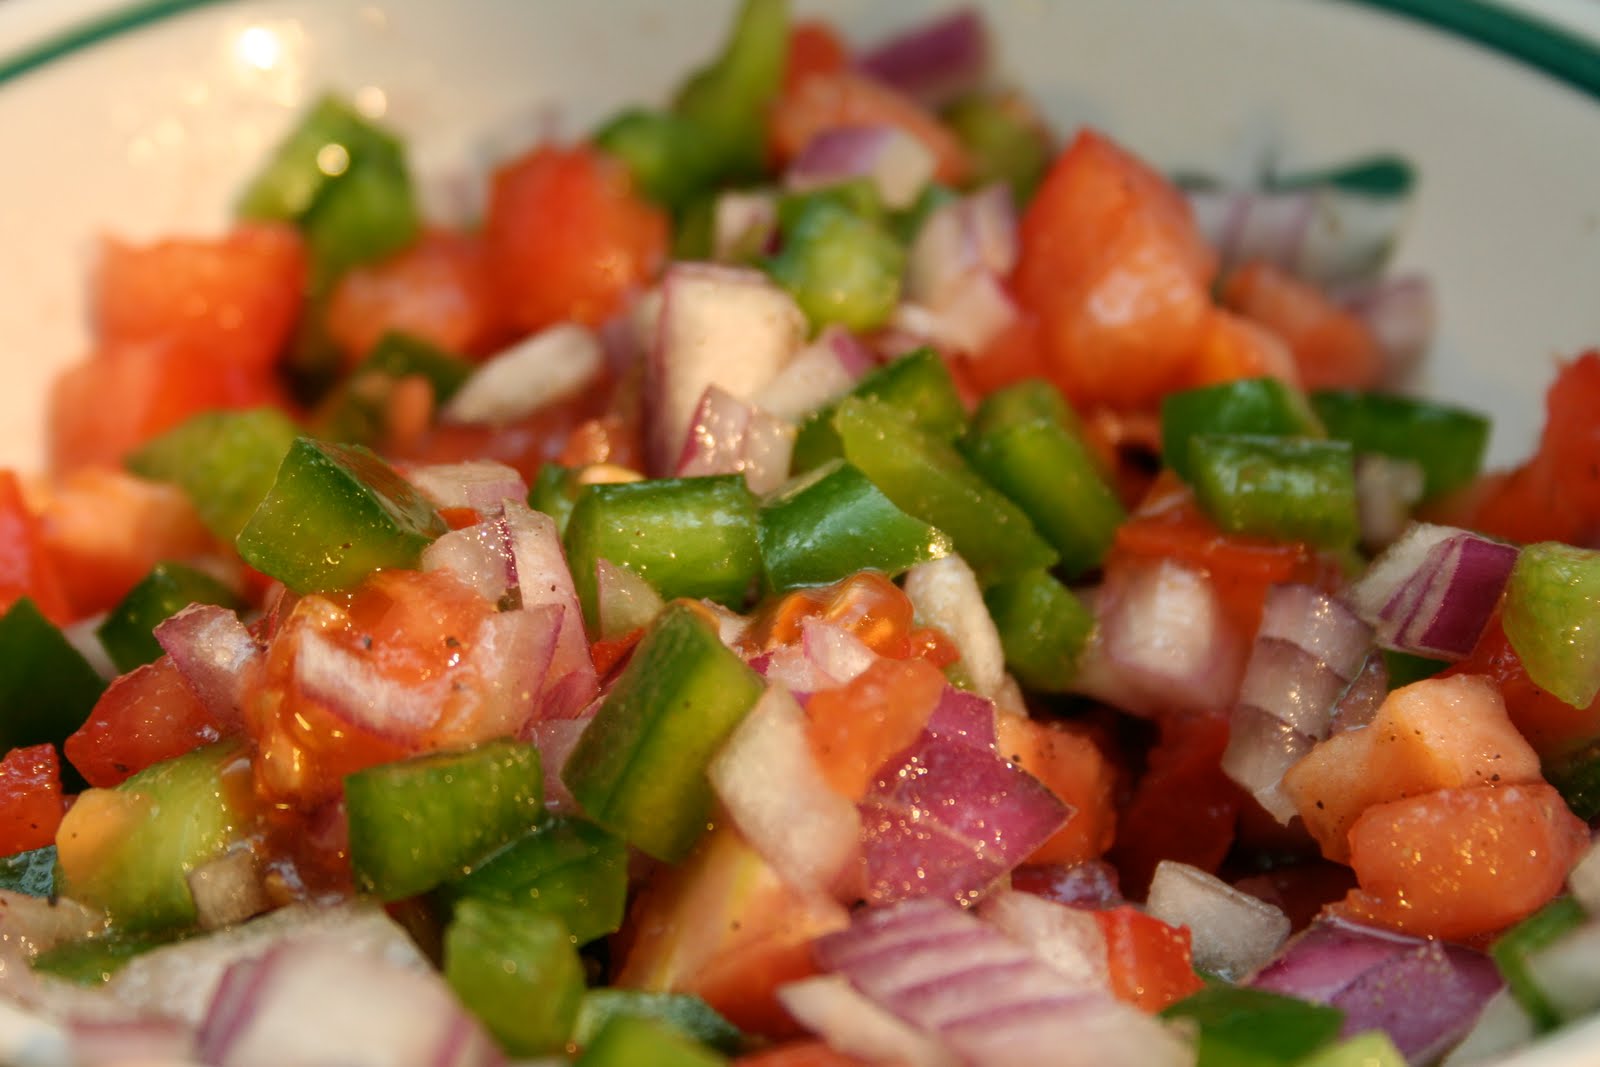   You top the dish with the salad of tomato, red onion, and green pepper. Bright, fresh, and crunchy, it breaks up the richness of the meat, eggs and potatoes. The dressing is equal parts vinegar and oil, plus generous salt.  